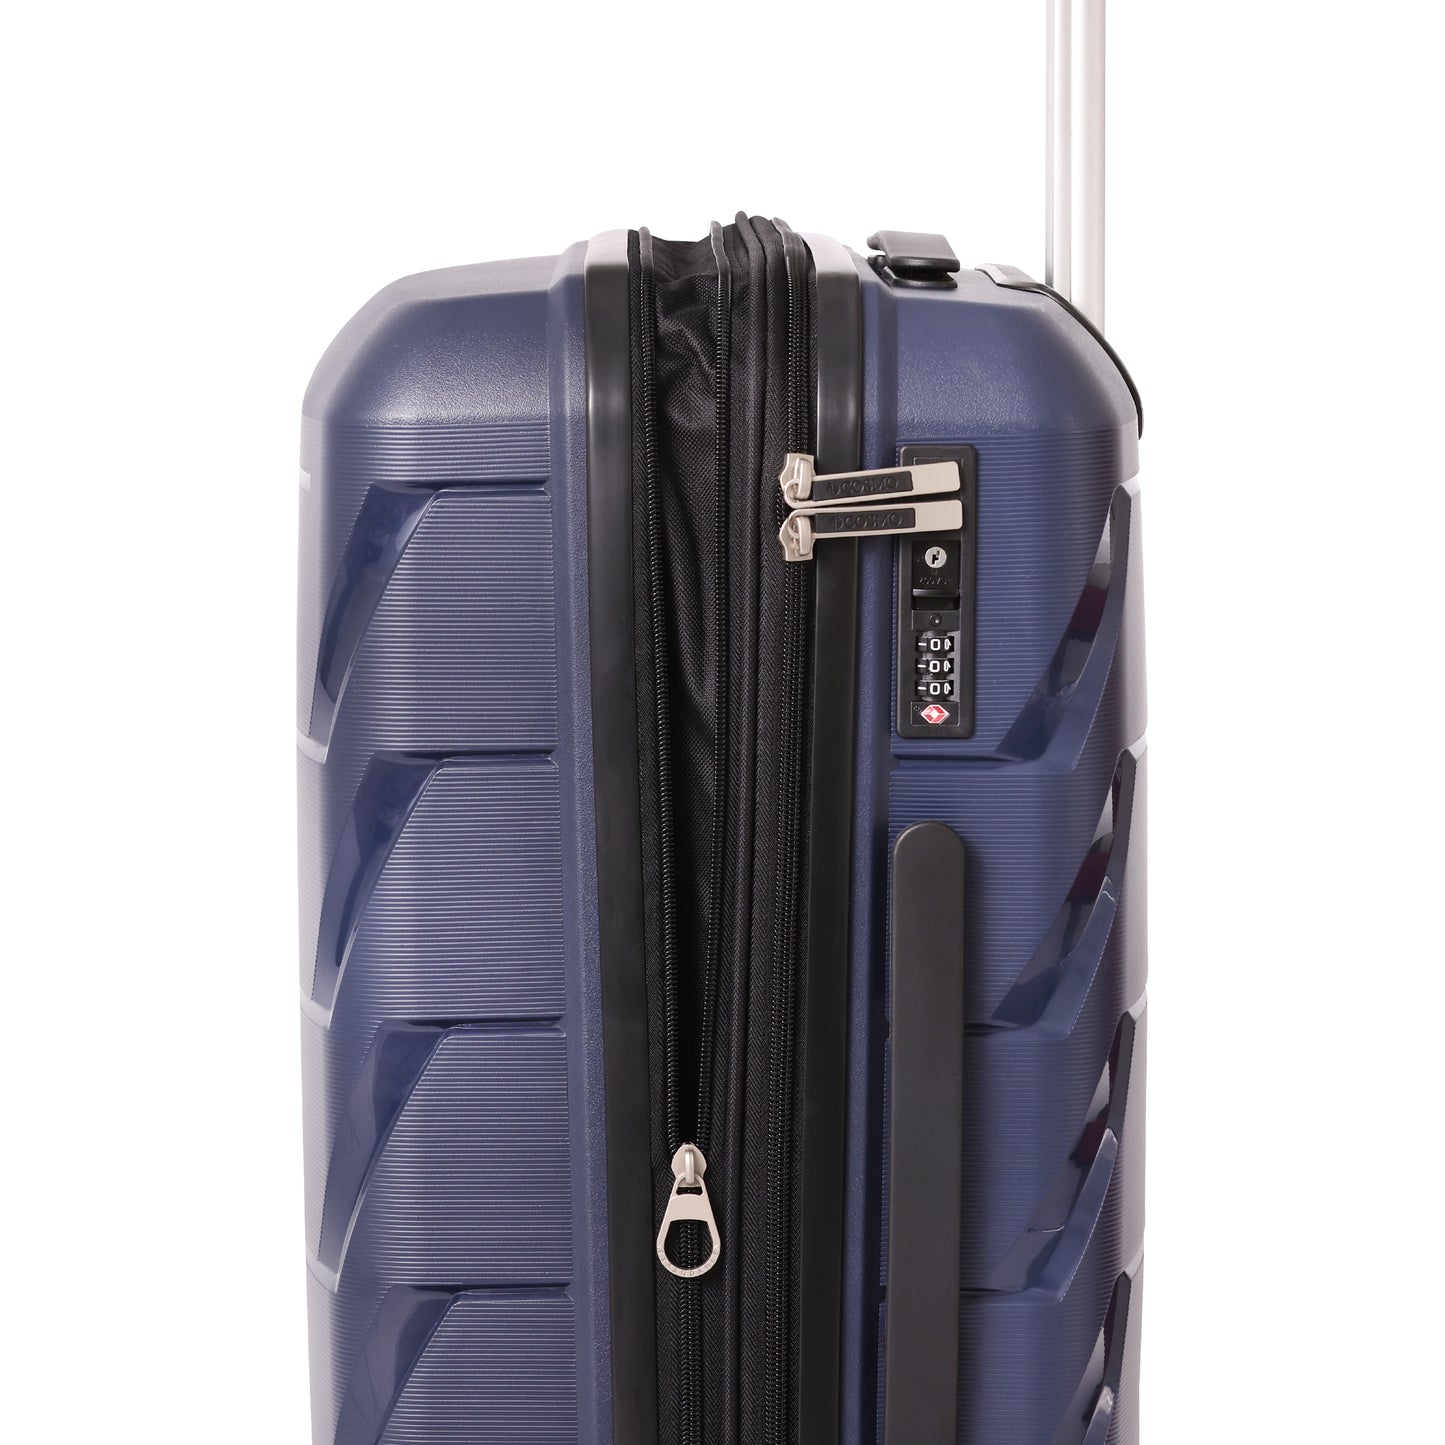 Cosmo Solitaire 50 cm Hard Luggage Trolley Case